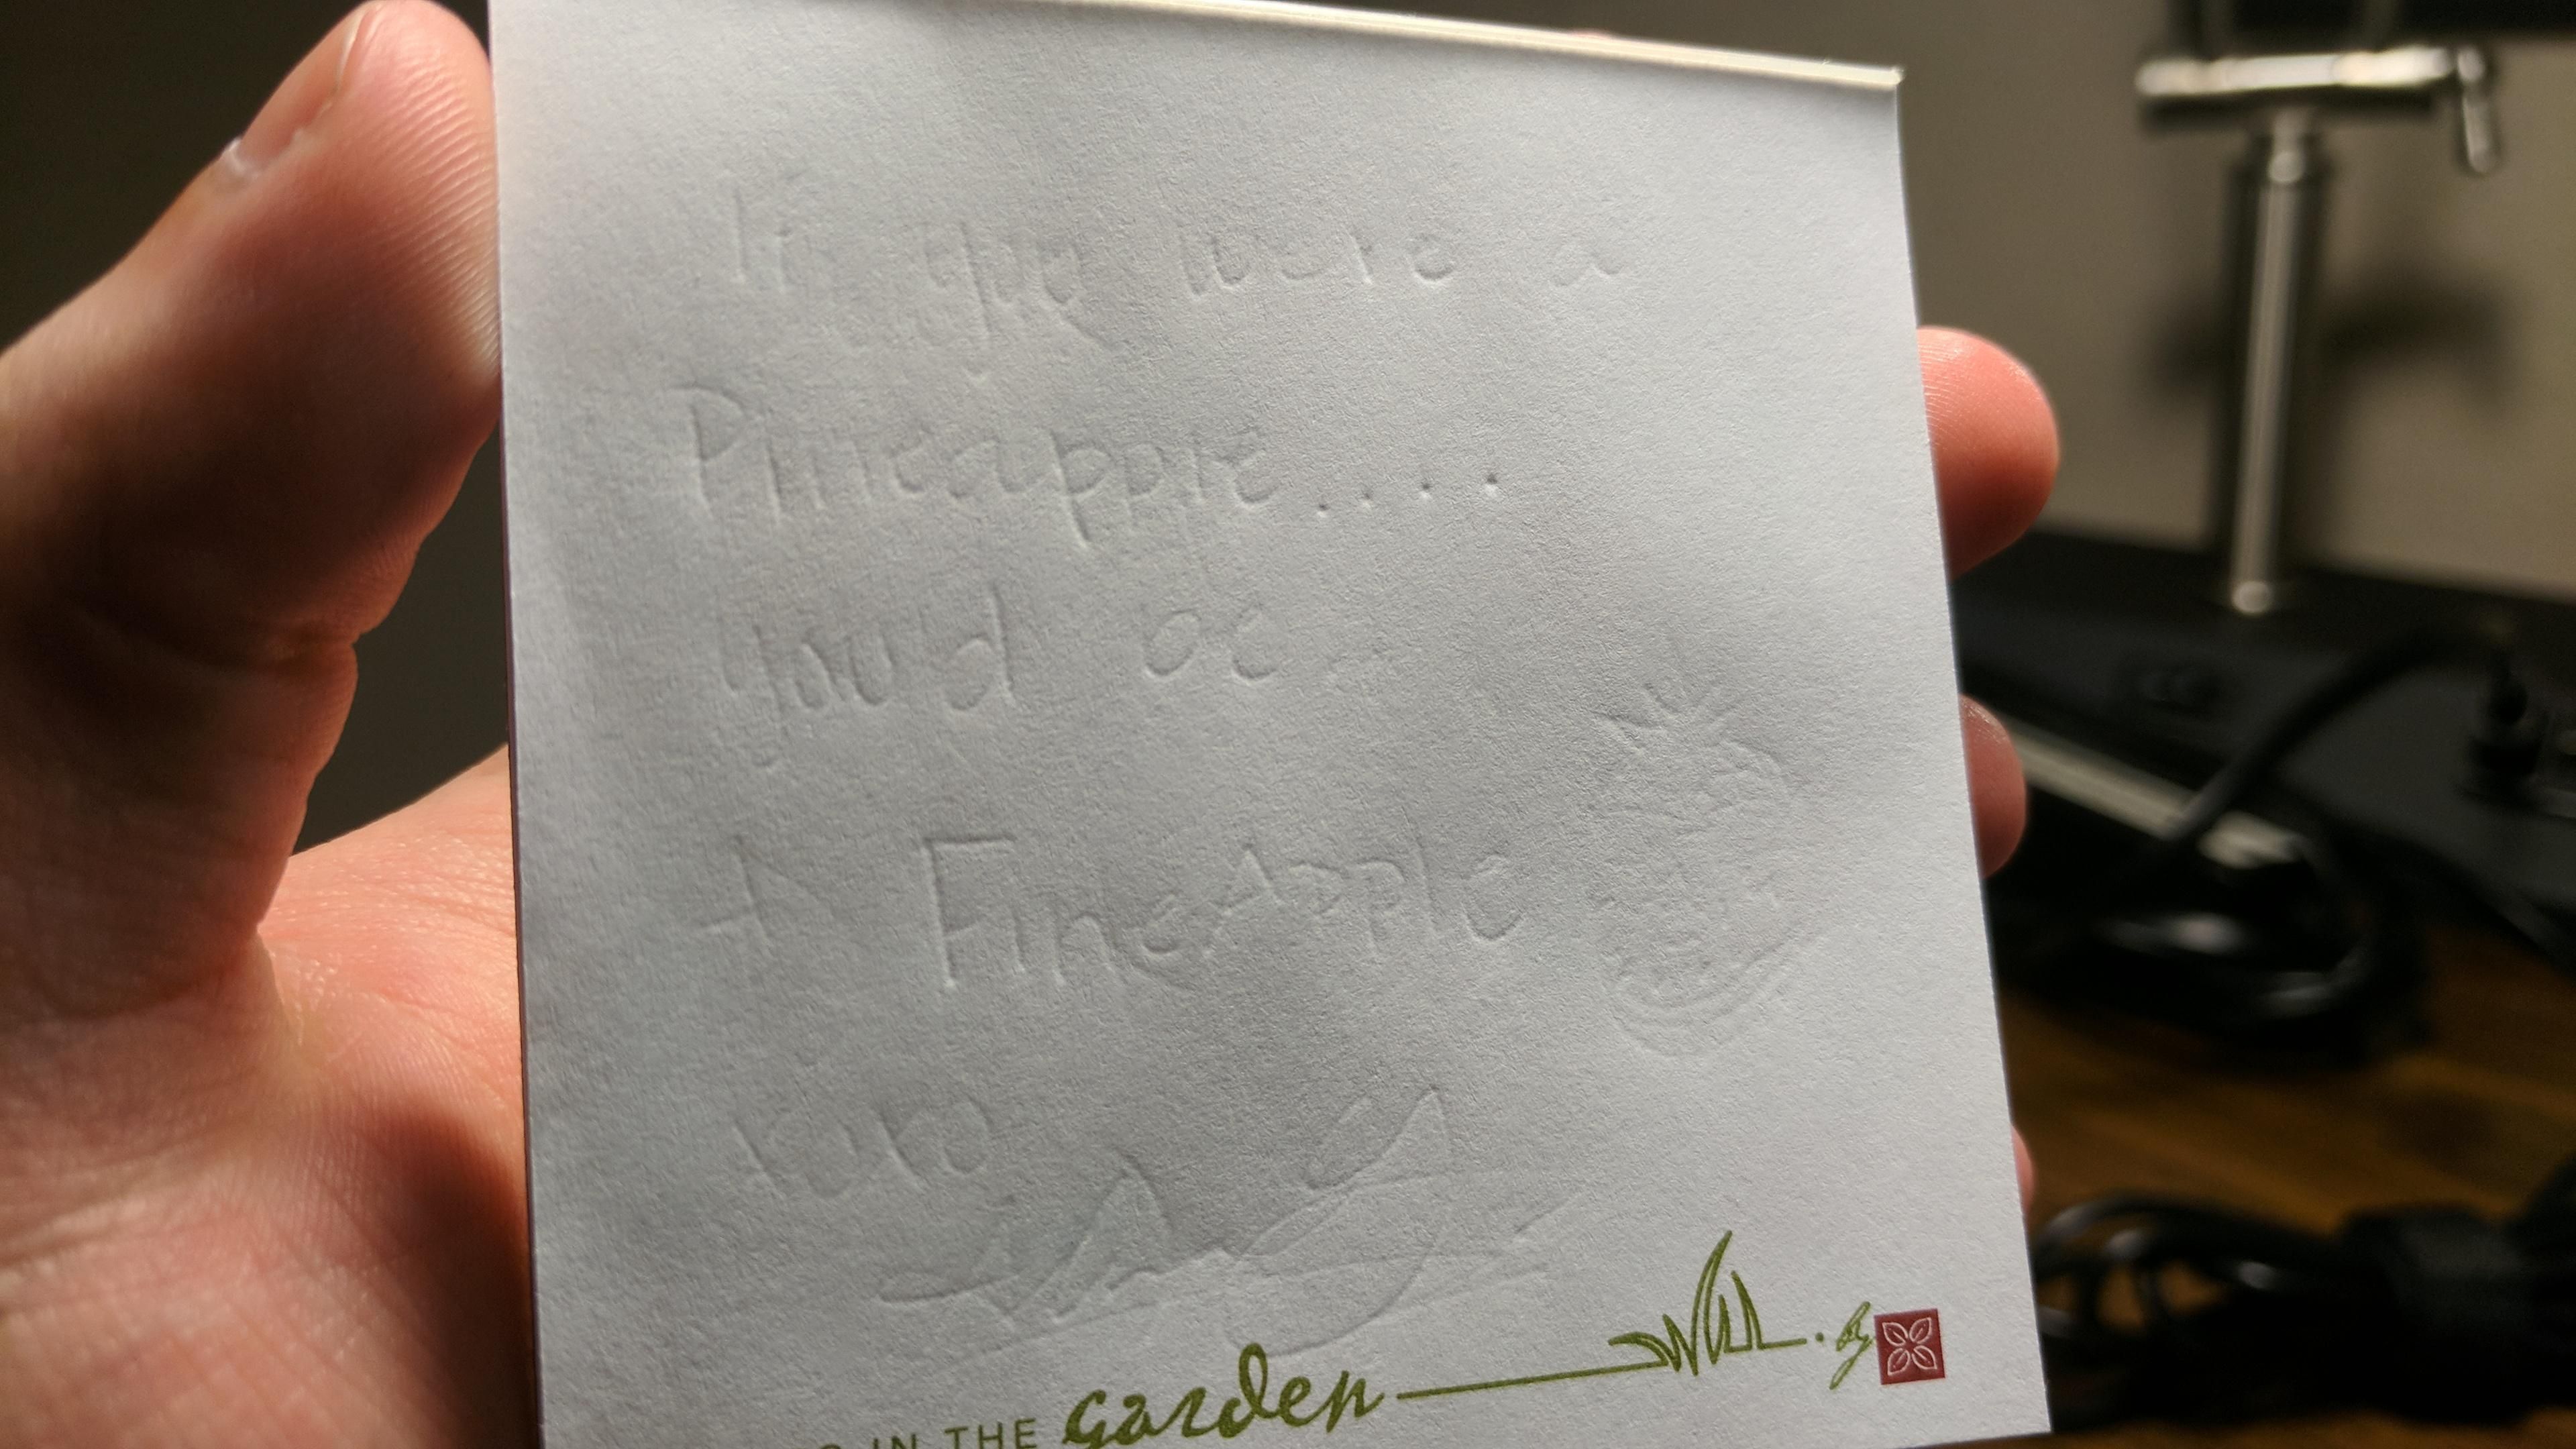 The previous note in my hotel room